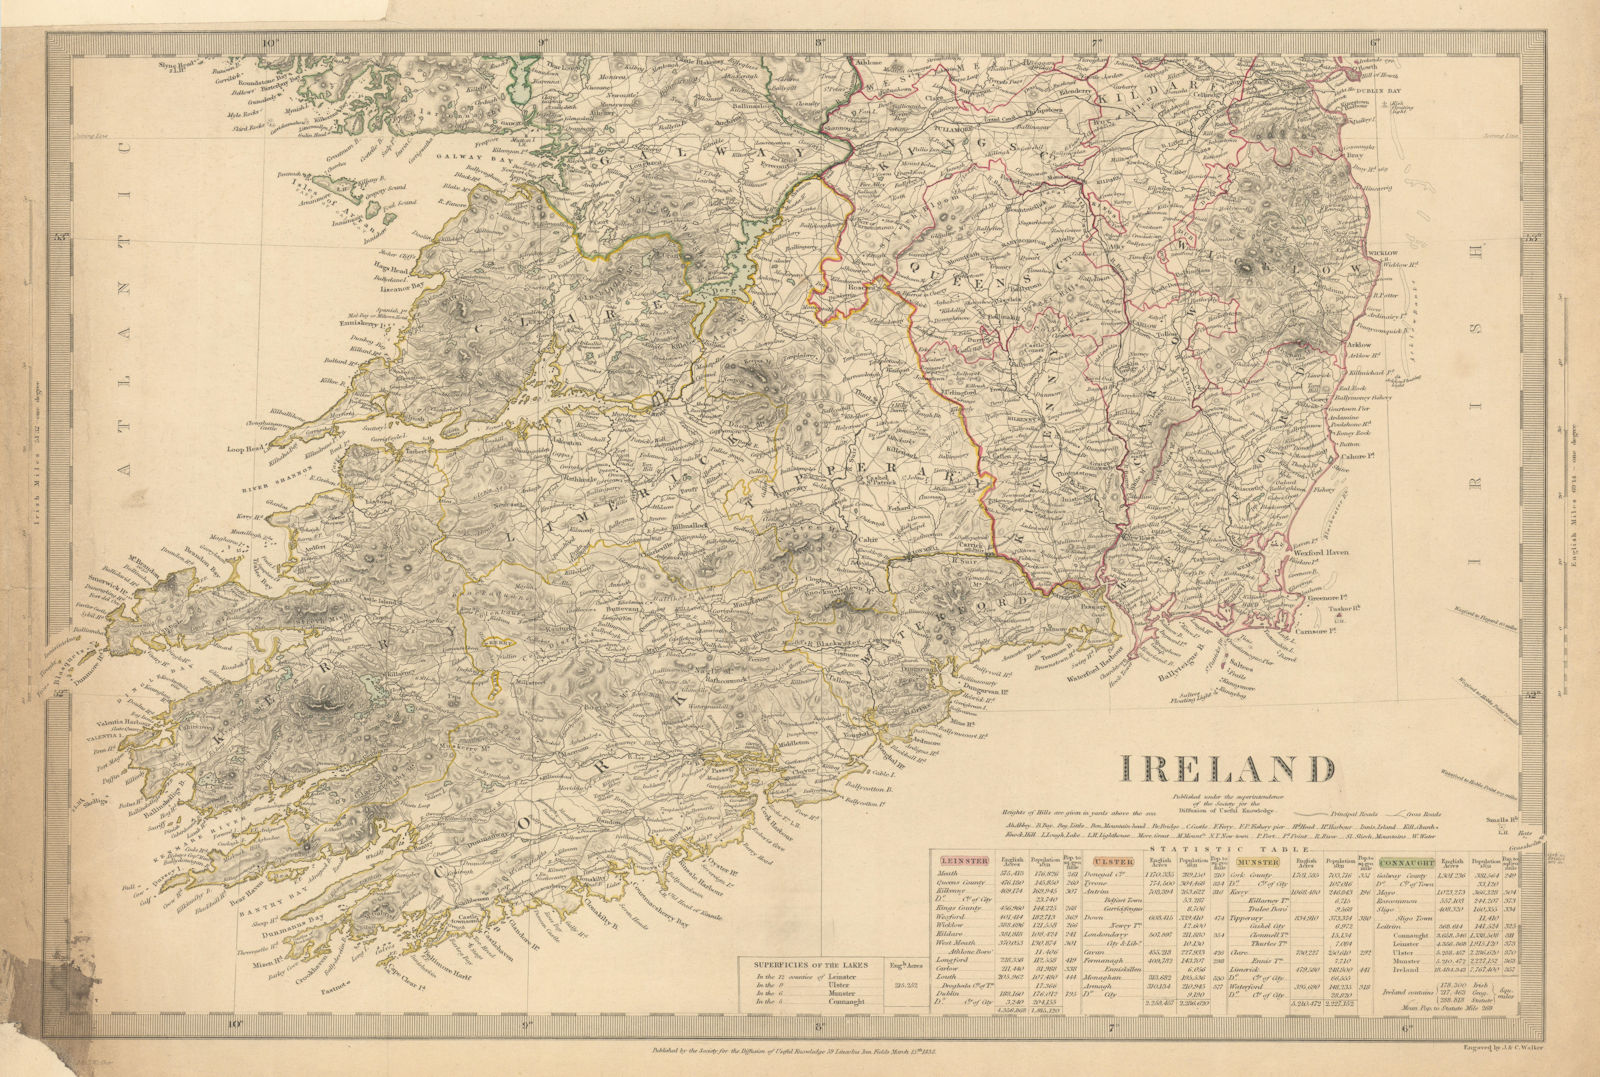 IRELAND.South Sheet. Population by counties & towns. Churches. SDUK 1844 map